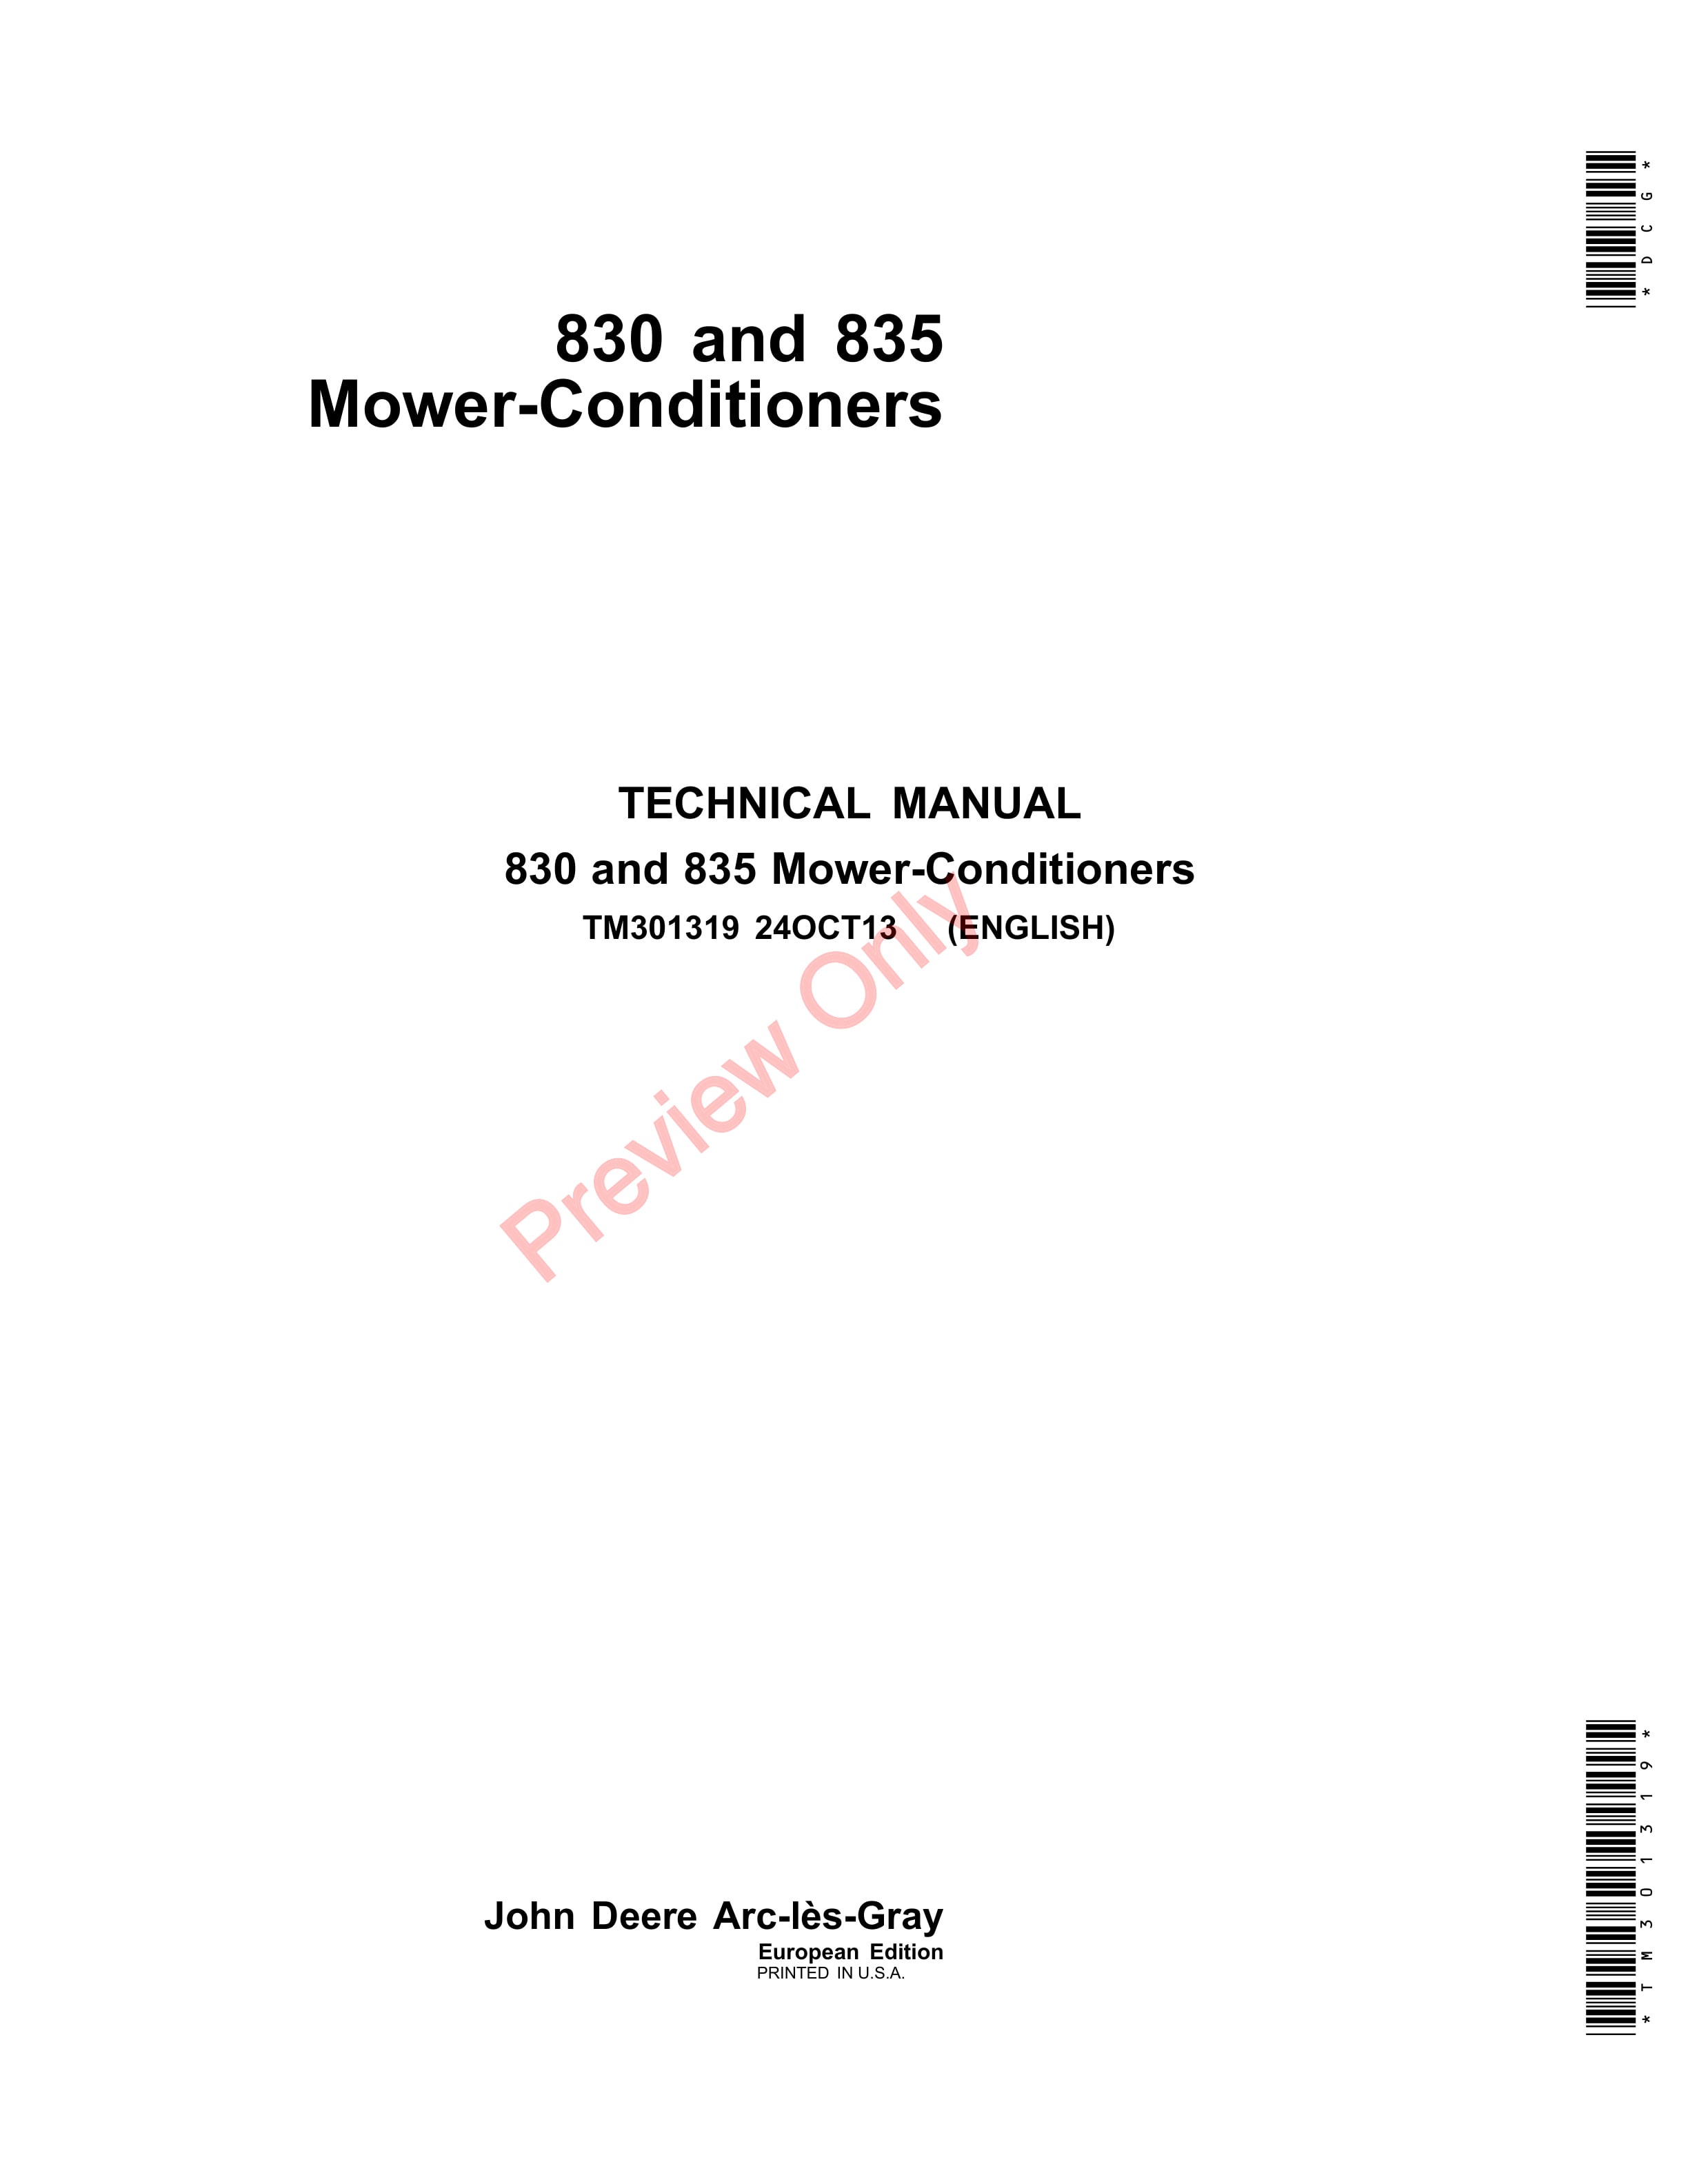 John Deere 830 and 835 Mower-Conditioners Technical Manual TM301319 24OCT13-1